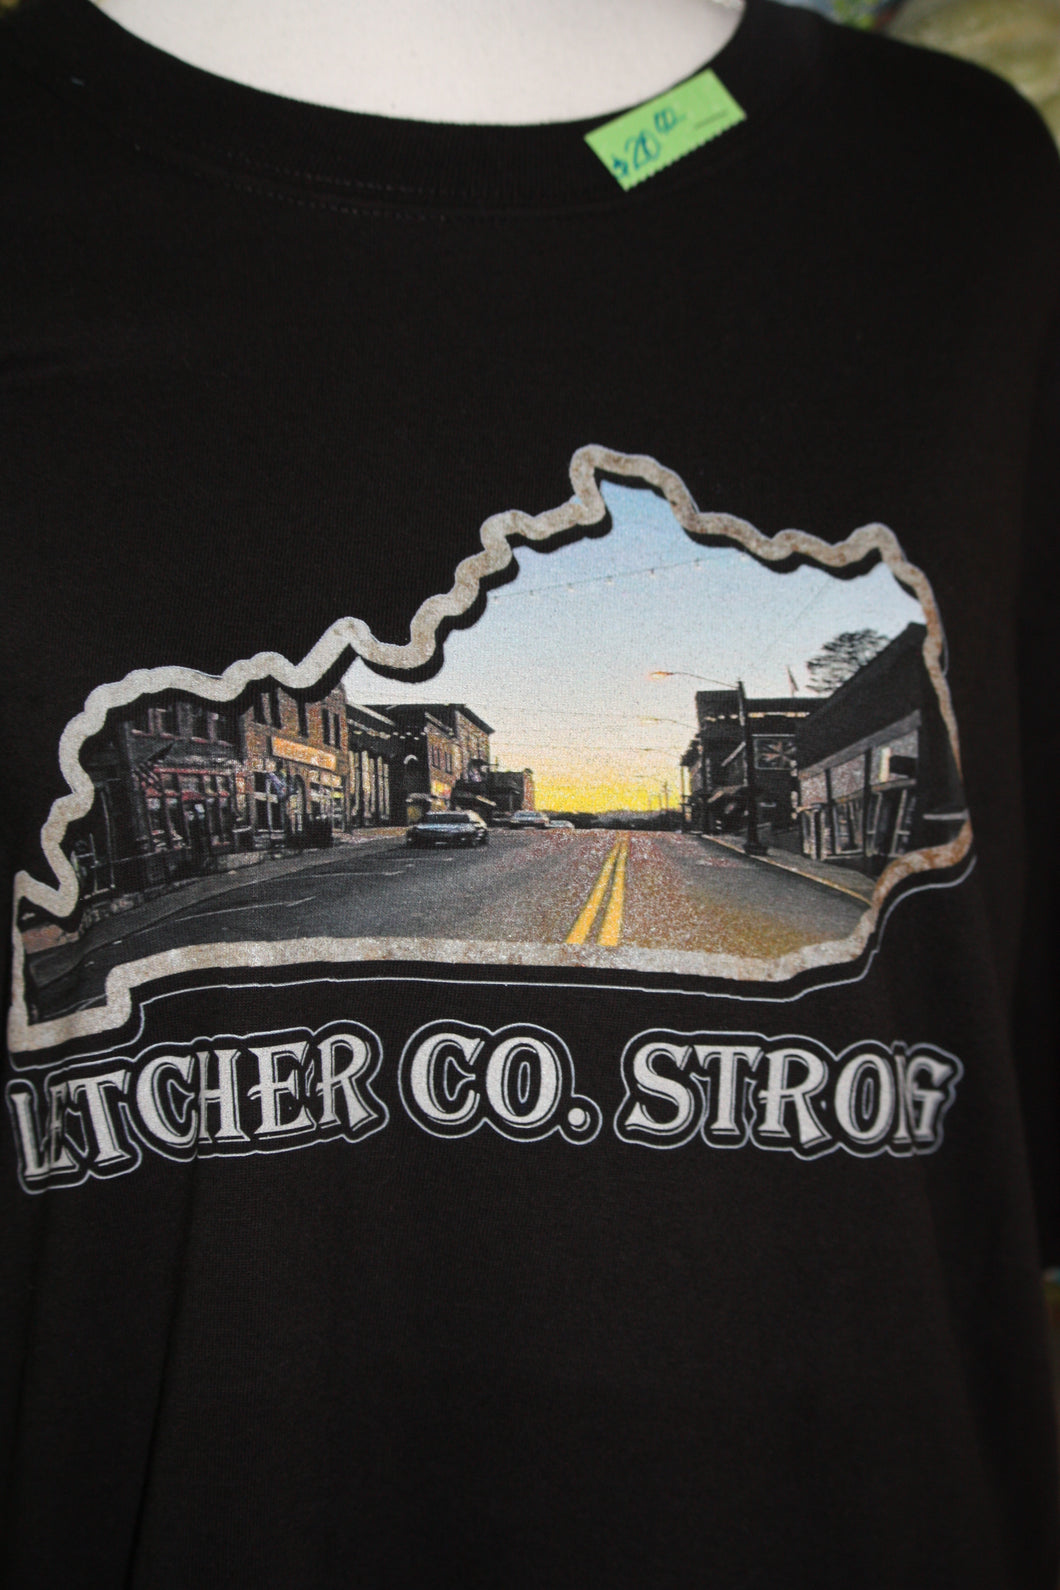 FLOOD DISASTER SUPPORT SHIRTS Letcher Co. Strong/KY state